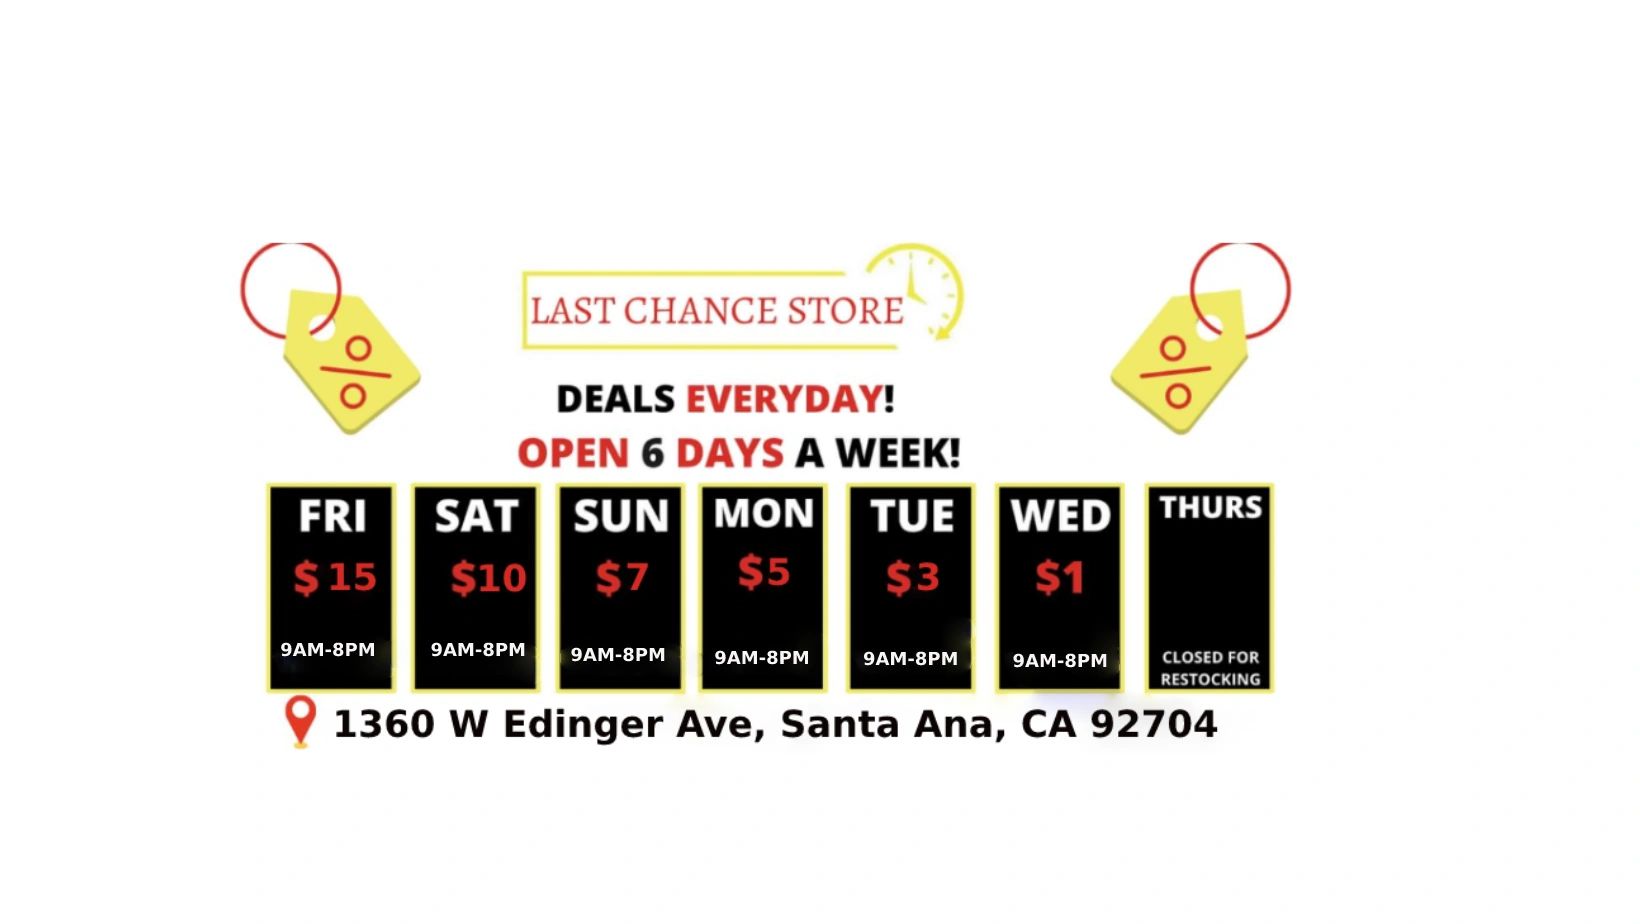 Last Chance Bargain Shoes & Apparel is one of the best places to shop in  Phoenix